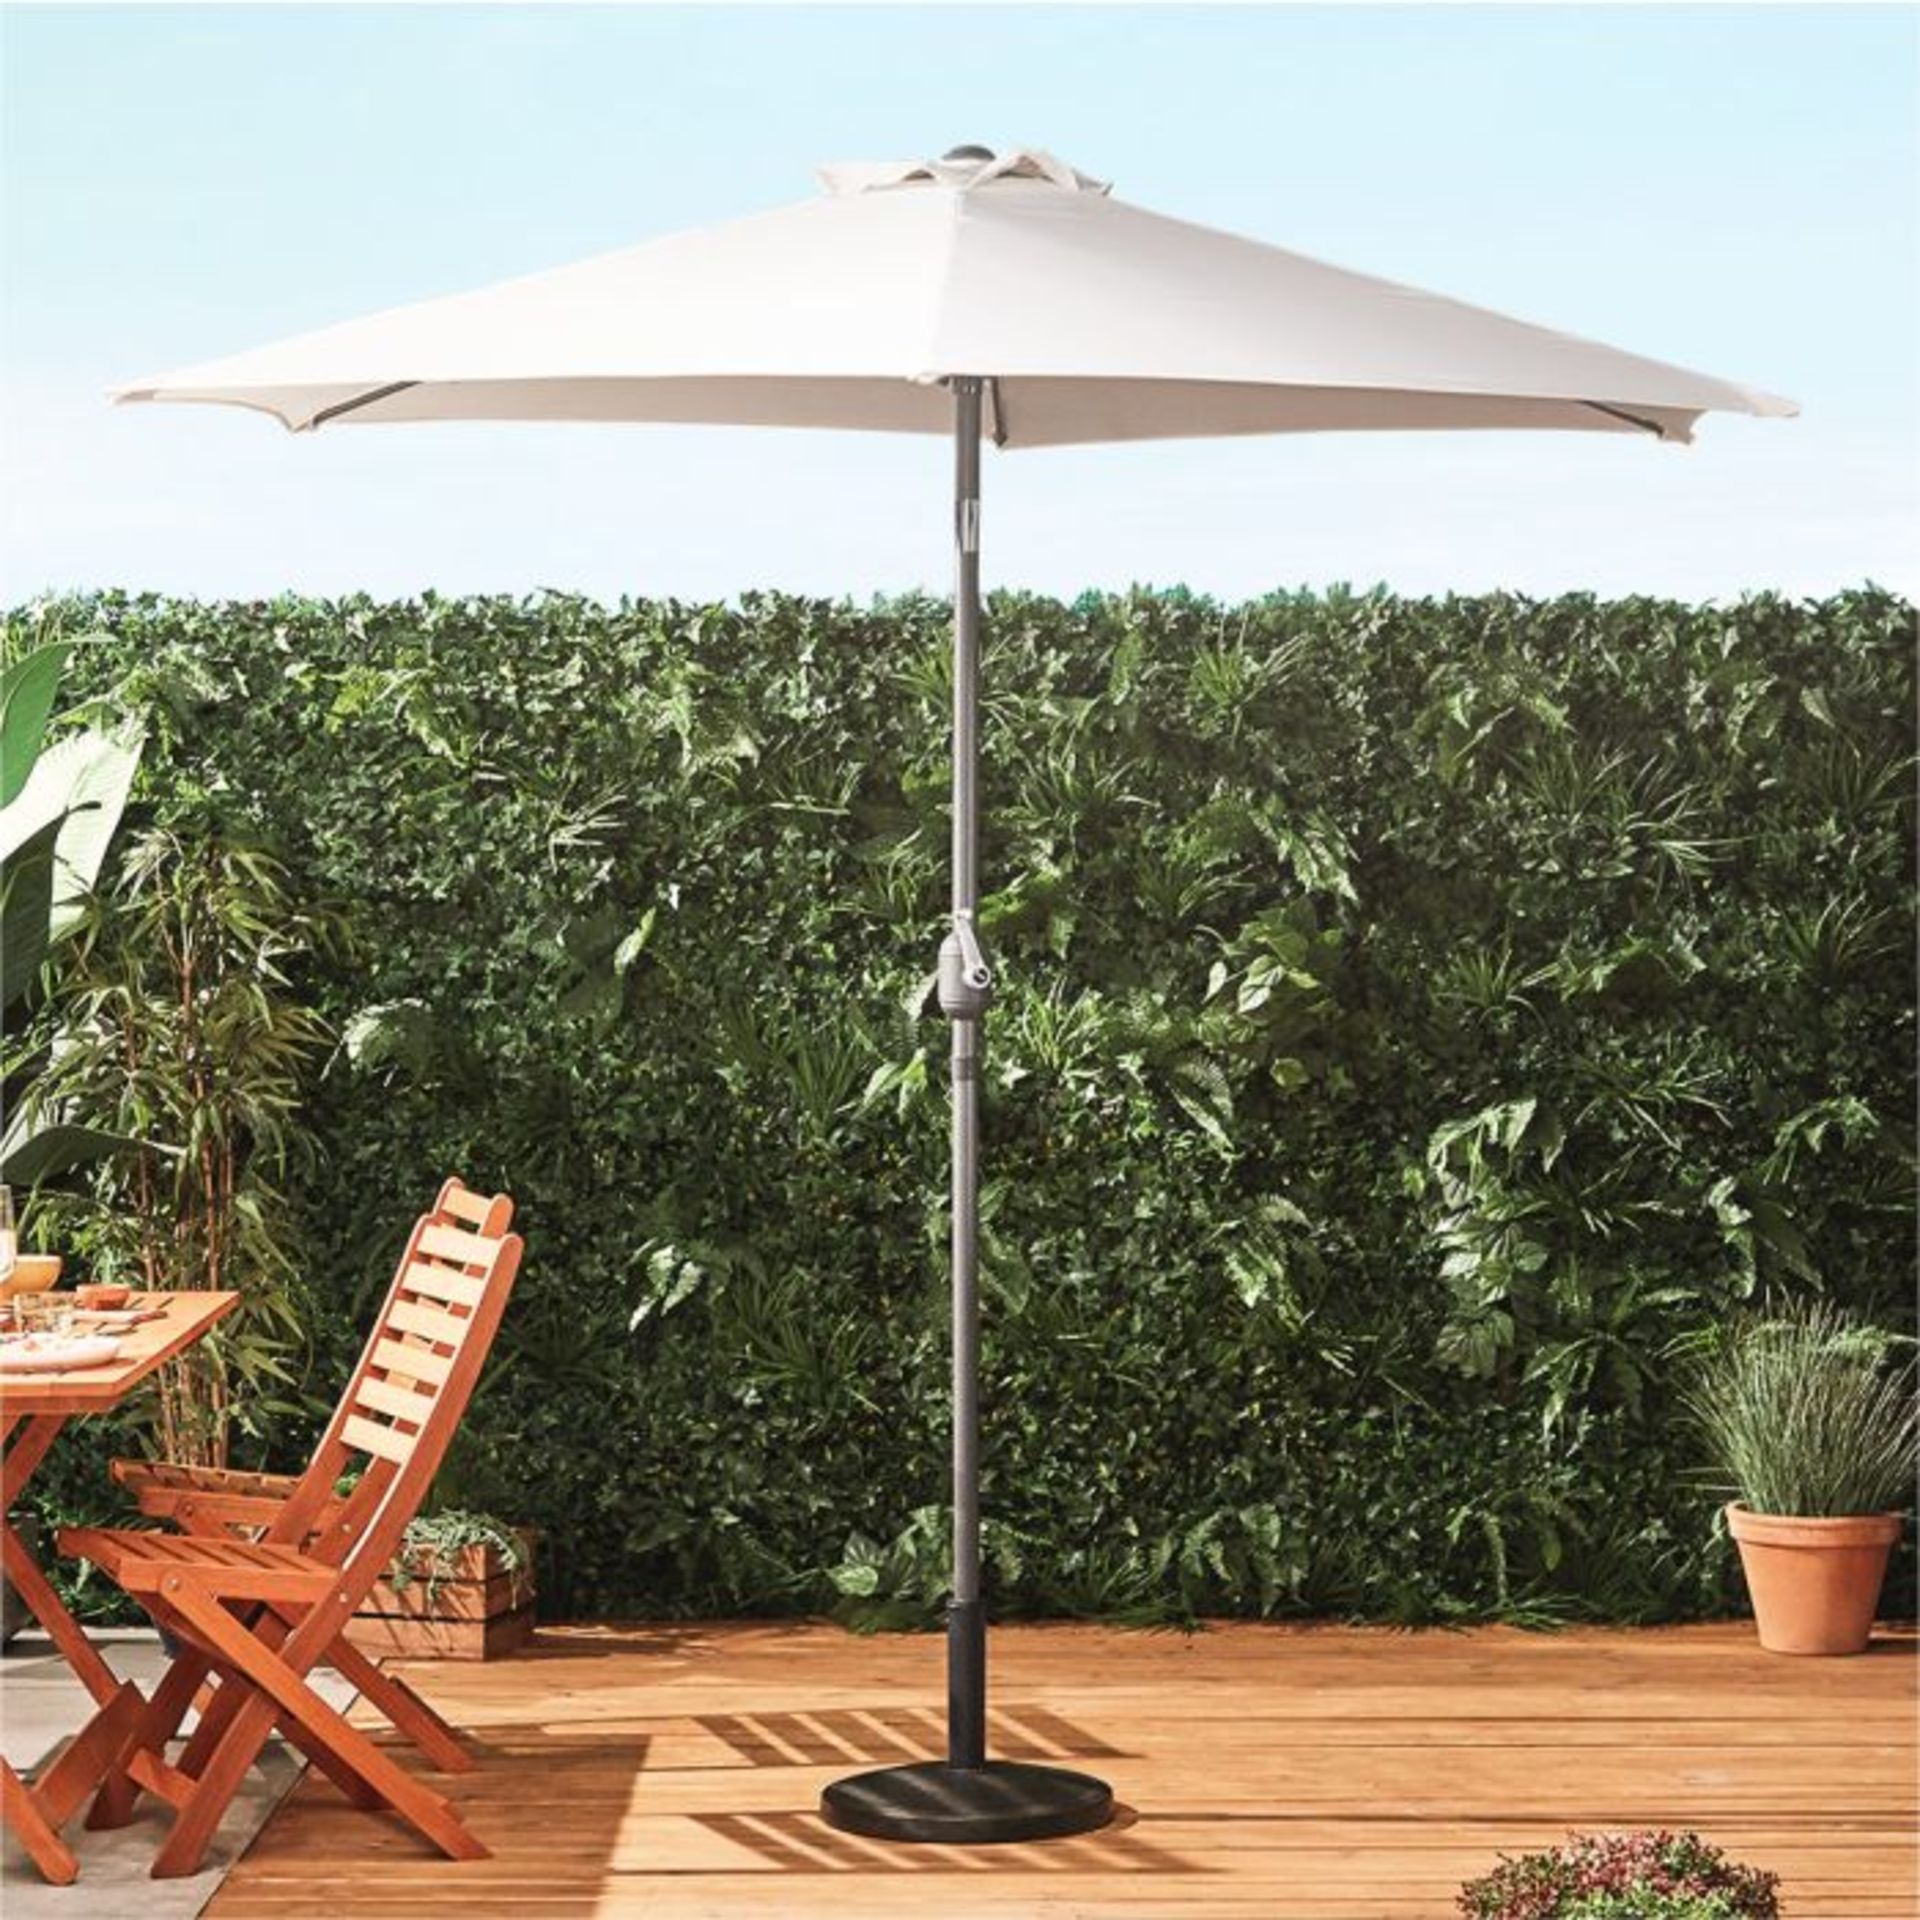 4x NEW & BOXED Ivory Cream 2.7m Steel Garden Parasol. RRP £59.99. (062.1). As much as everyone loves - Bild 5 aus 5